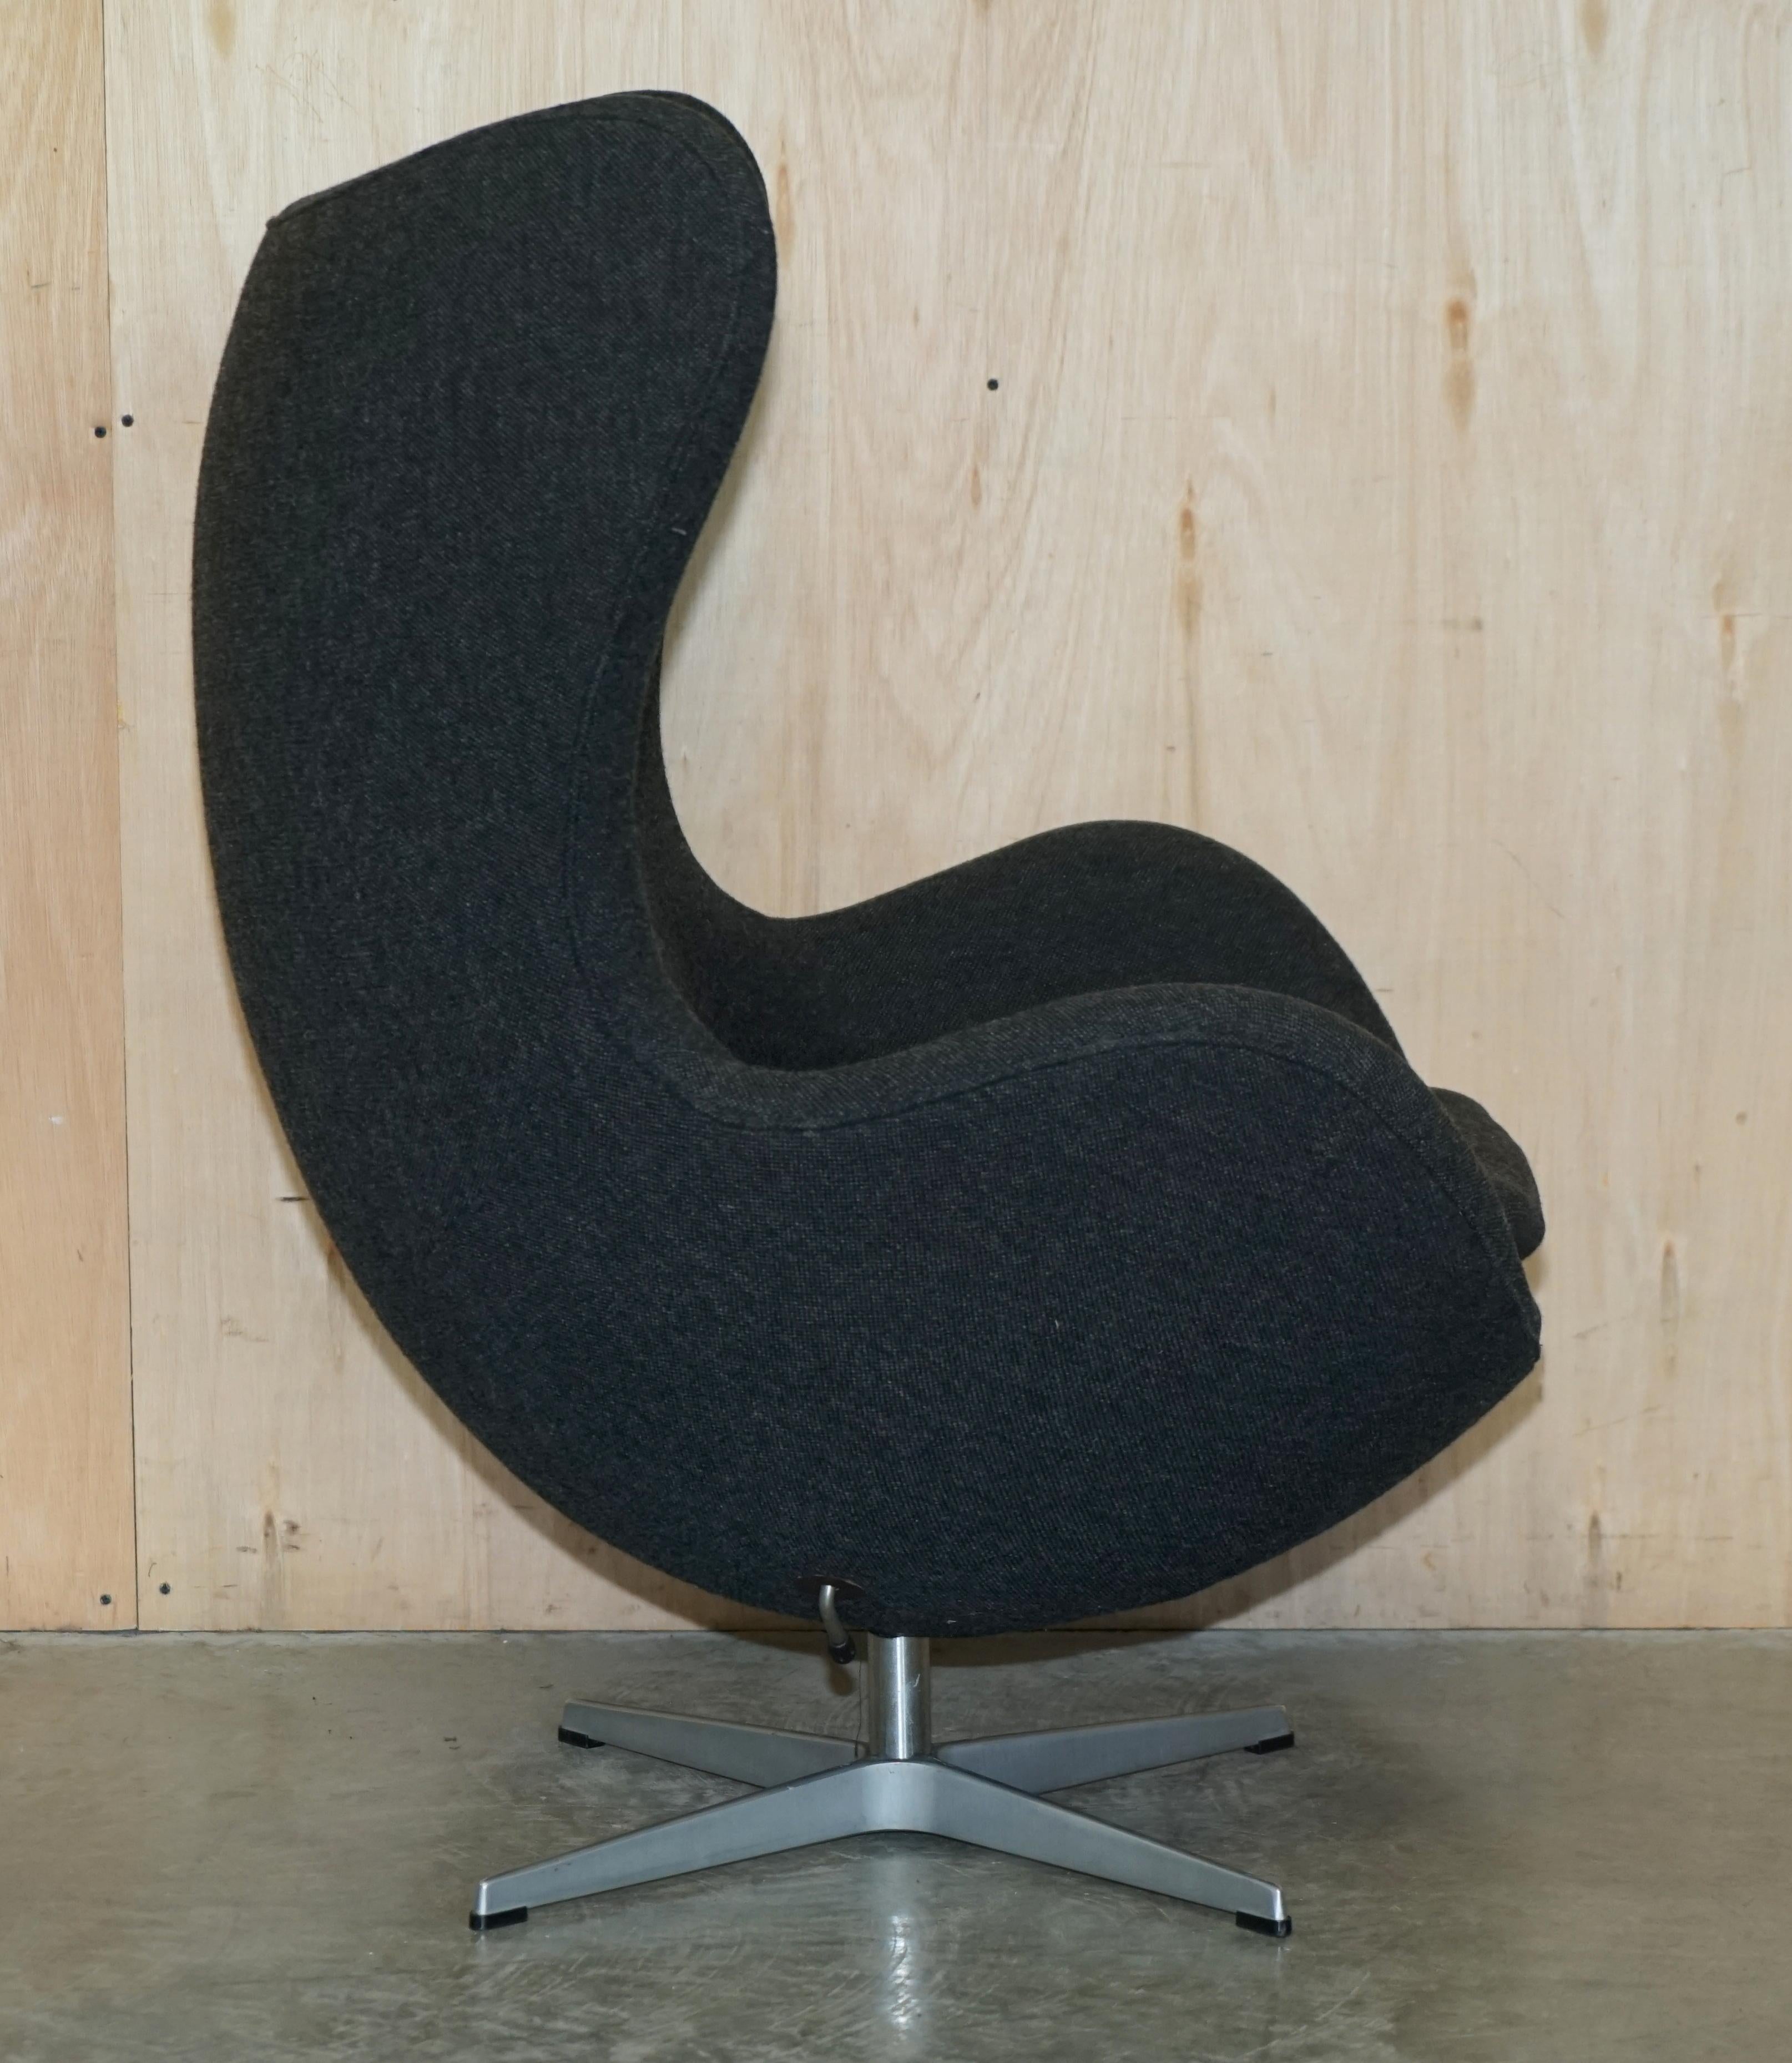 Original 1996 Stamped Fritz Hansen Egg Chair in Black / Grey Fabric For Sale 8